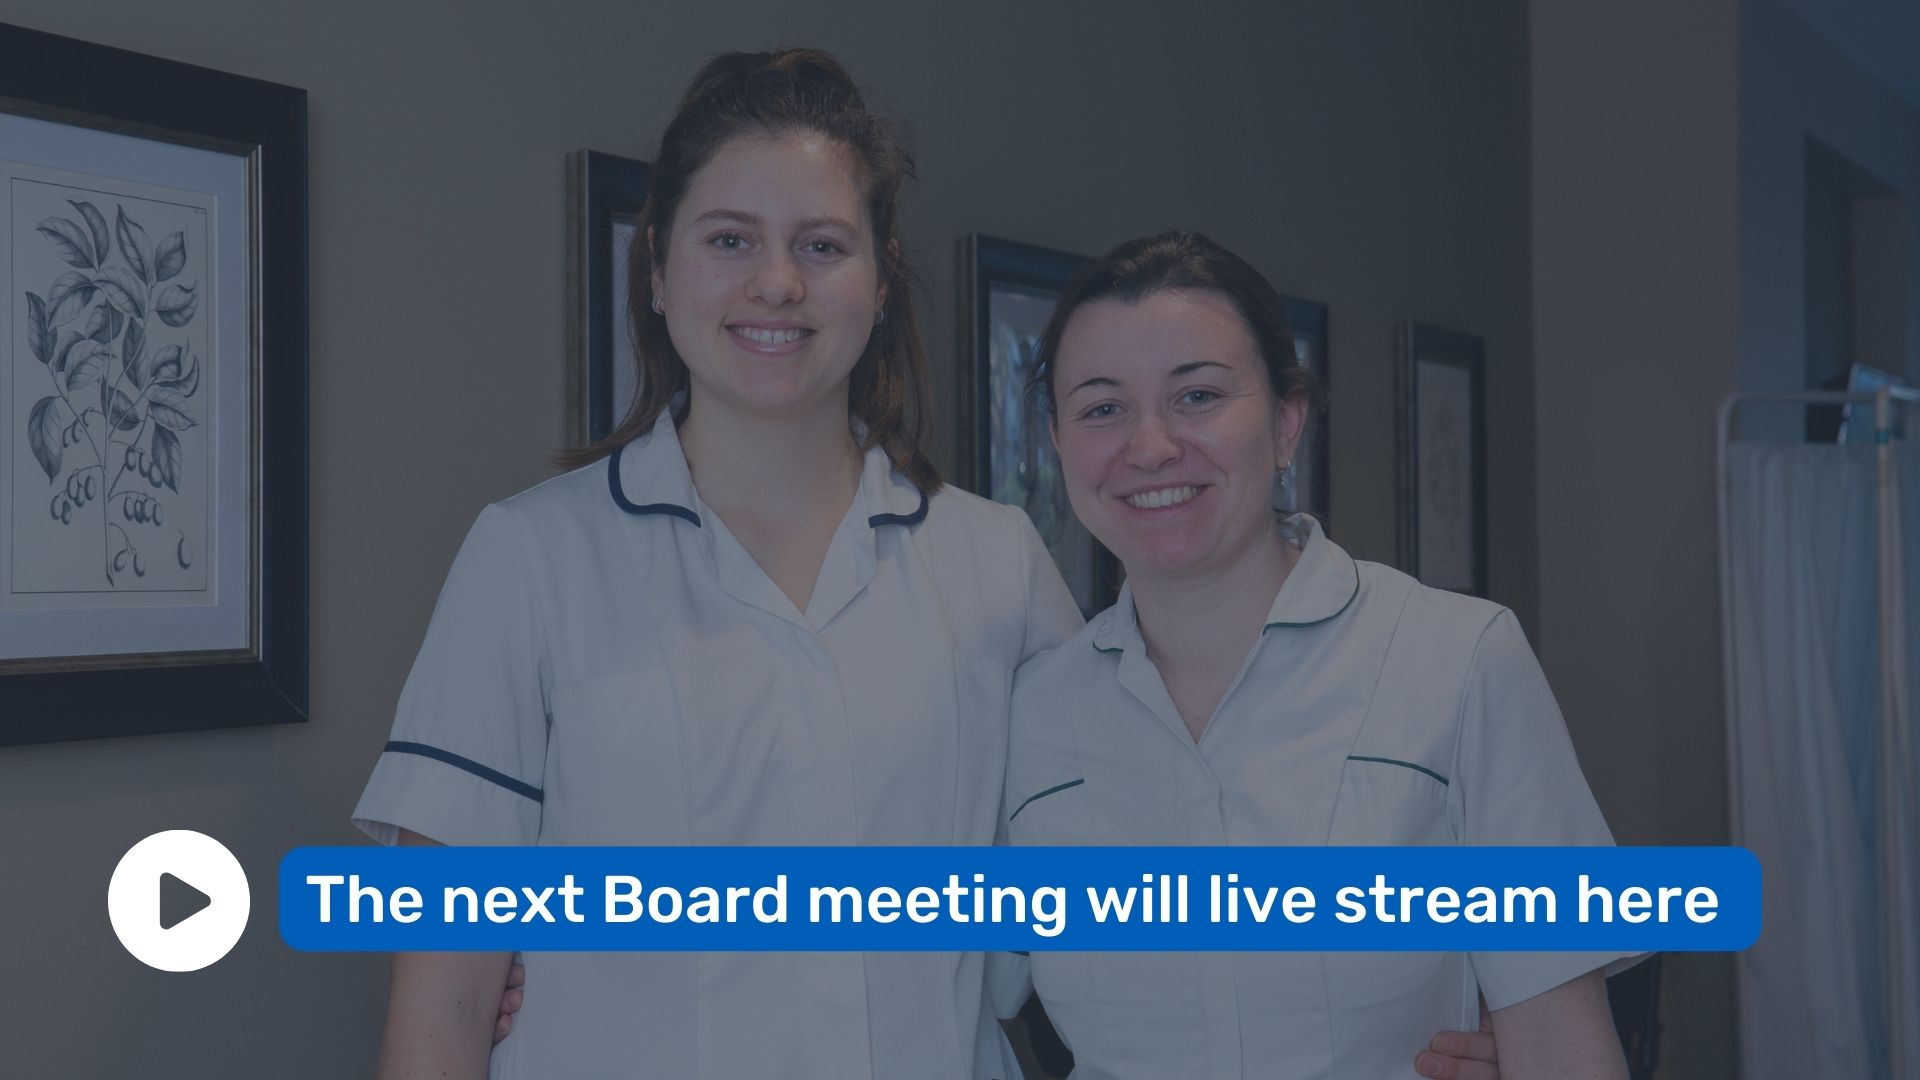 'The next Board meeting will live stream here' overlays two smiling people. 